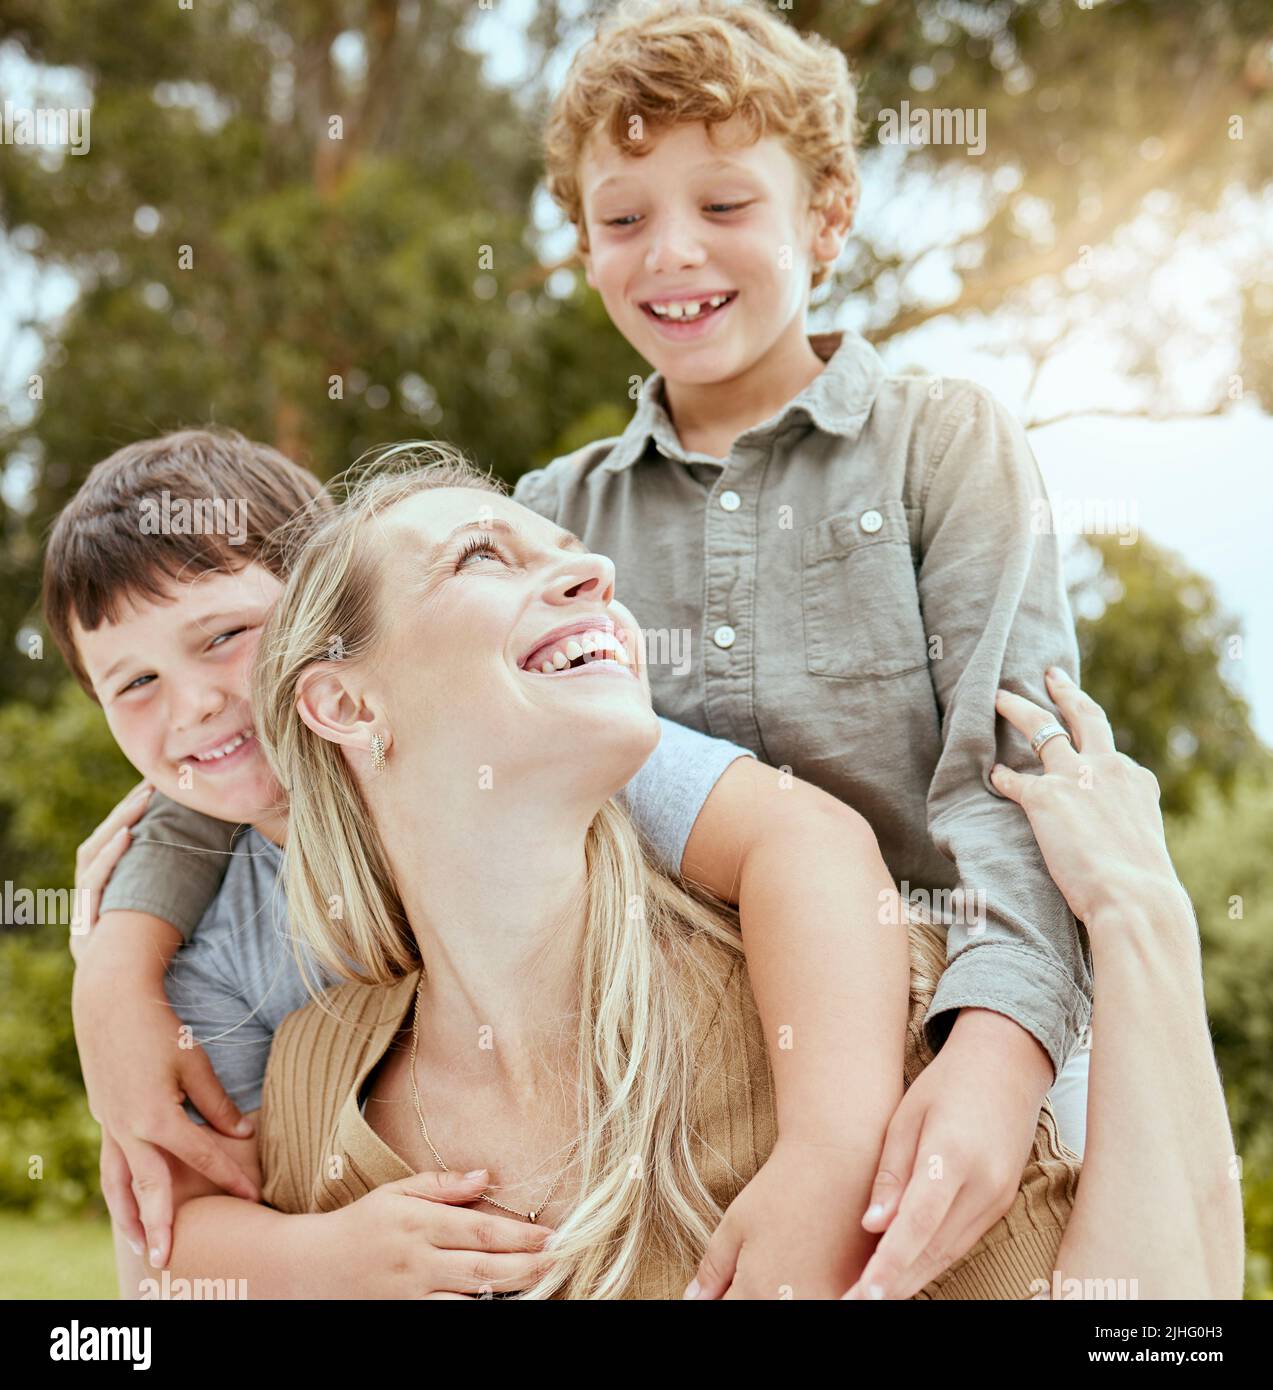 A happy caucasian single parent enjoying playing with her sons in the backyard. Smiling family of three having fun in a garden outside Stock Photo